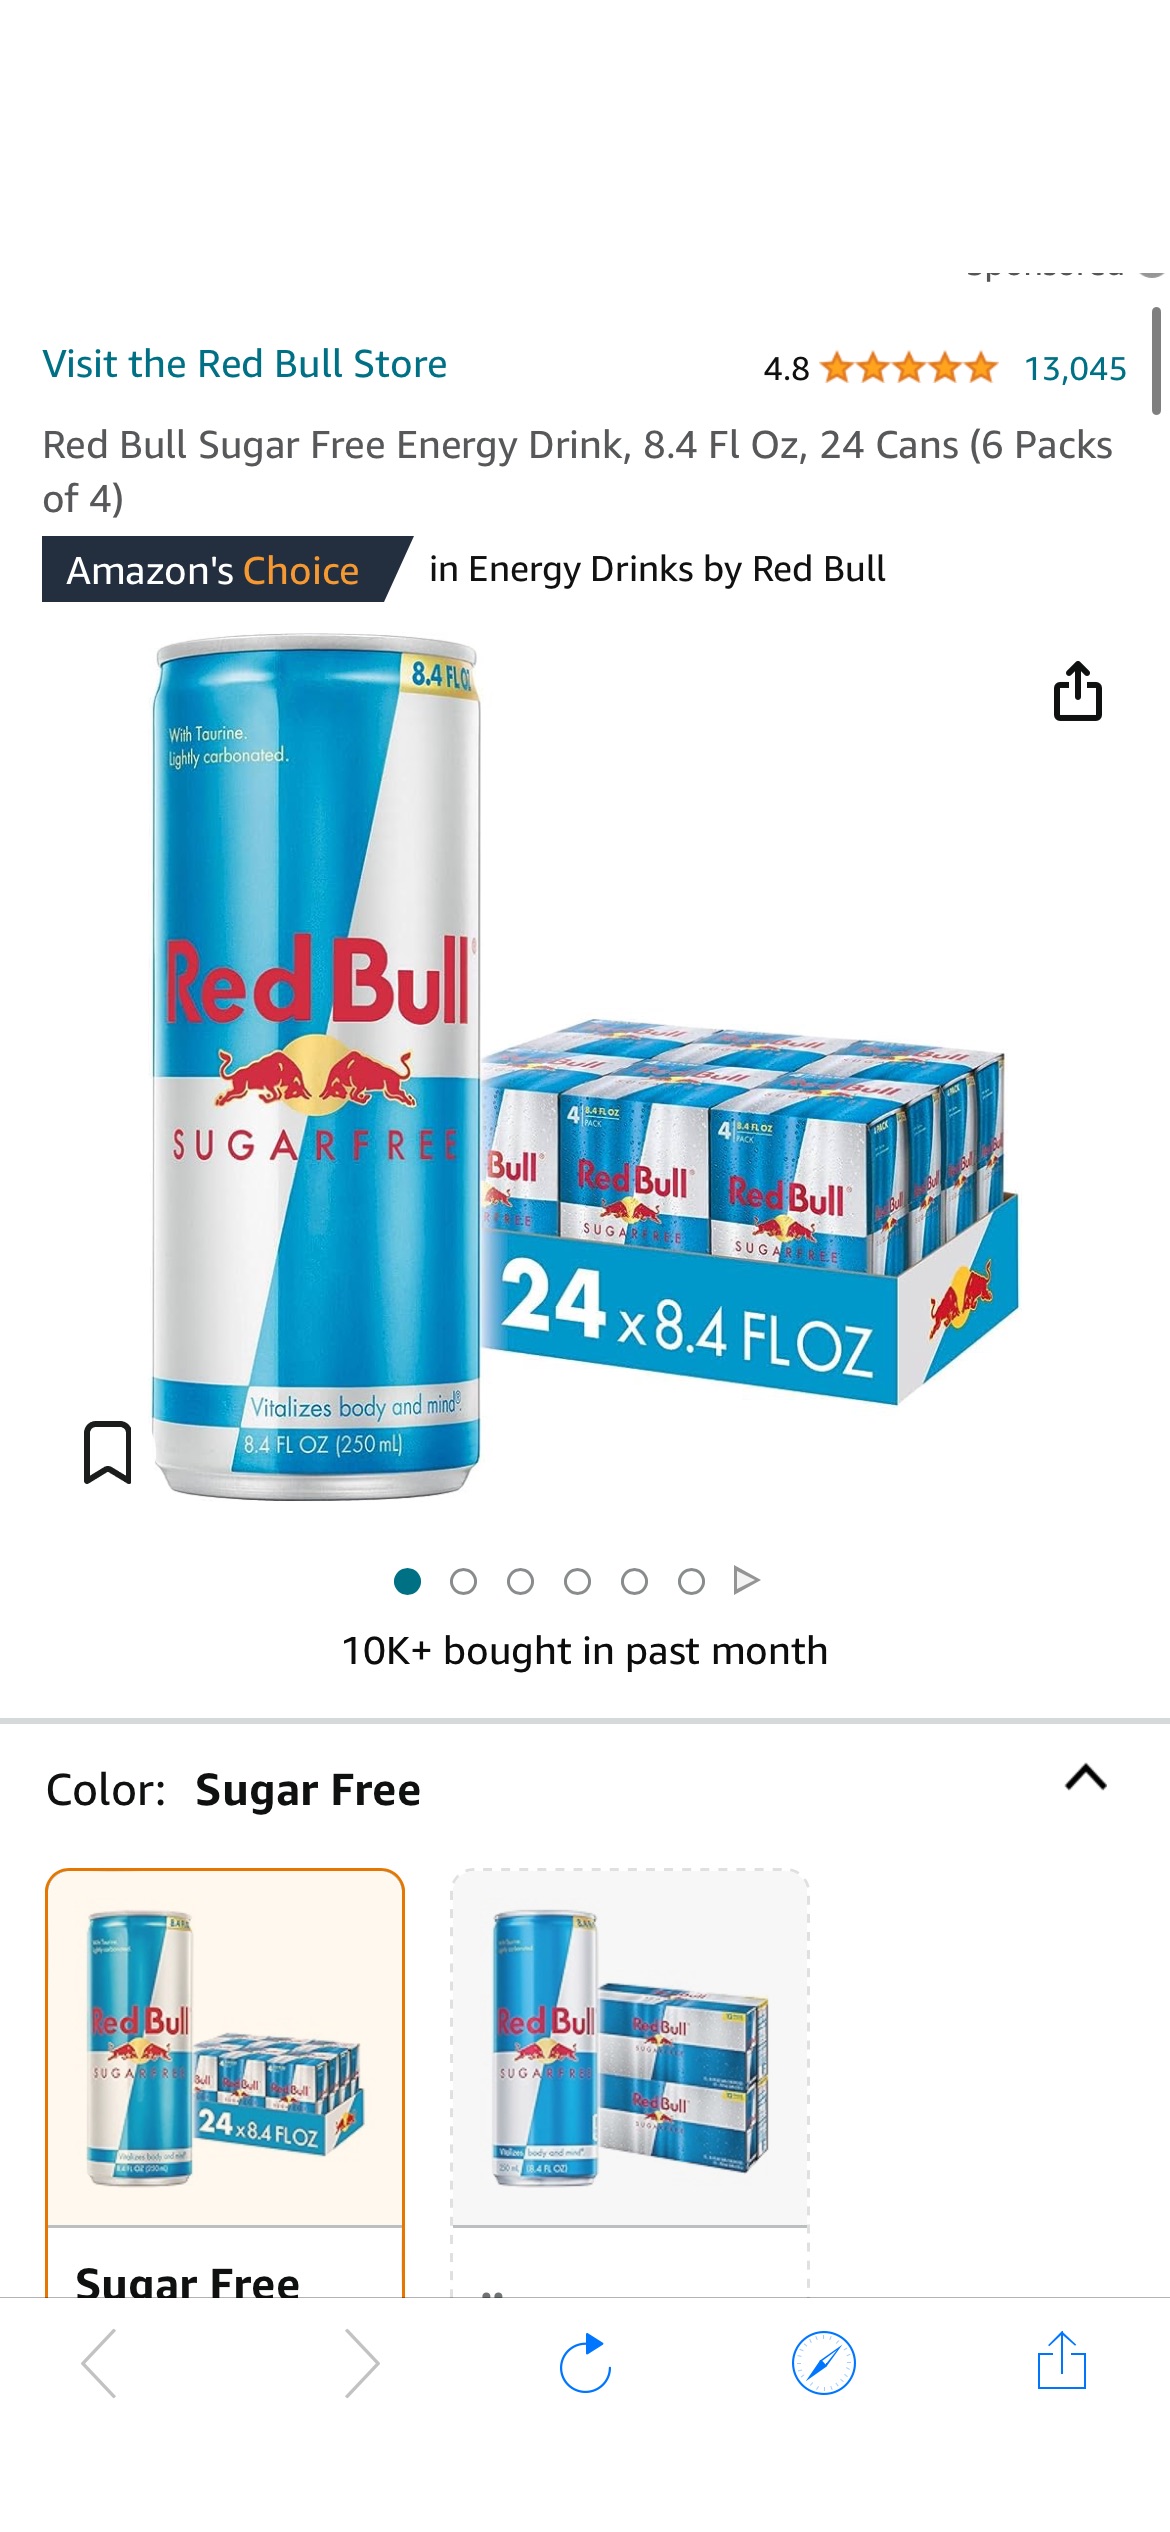 Amazon.com : Red Bull Sugar Free Energy Drink, 8.4 Fl Oz, 24 Cans (6 Packs of 4) : Energy Drinks : Grocery & Gourmet Food